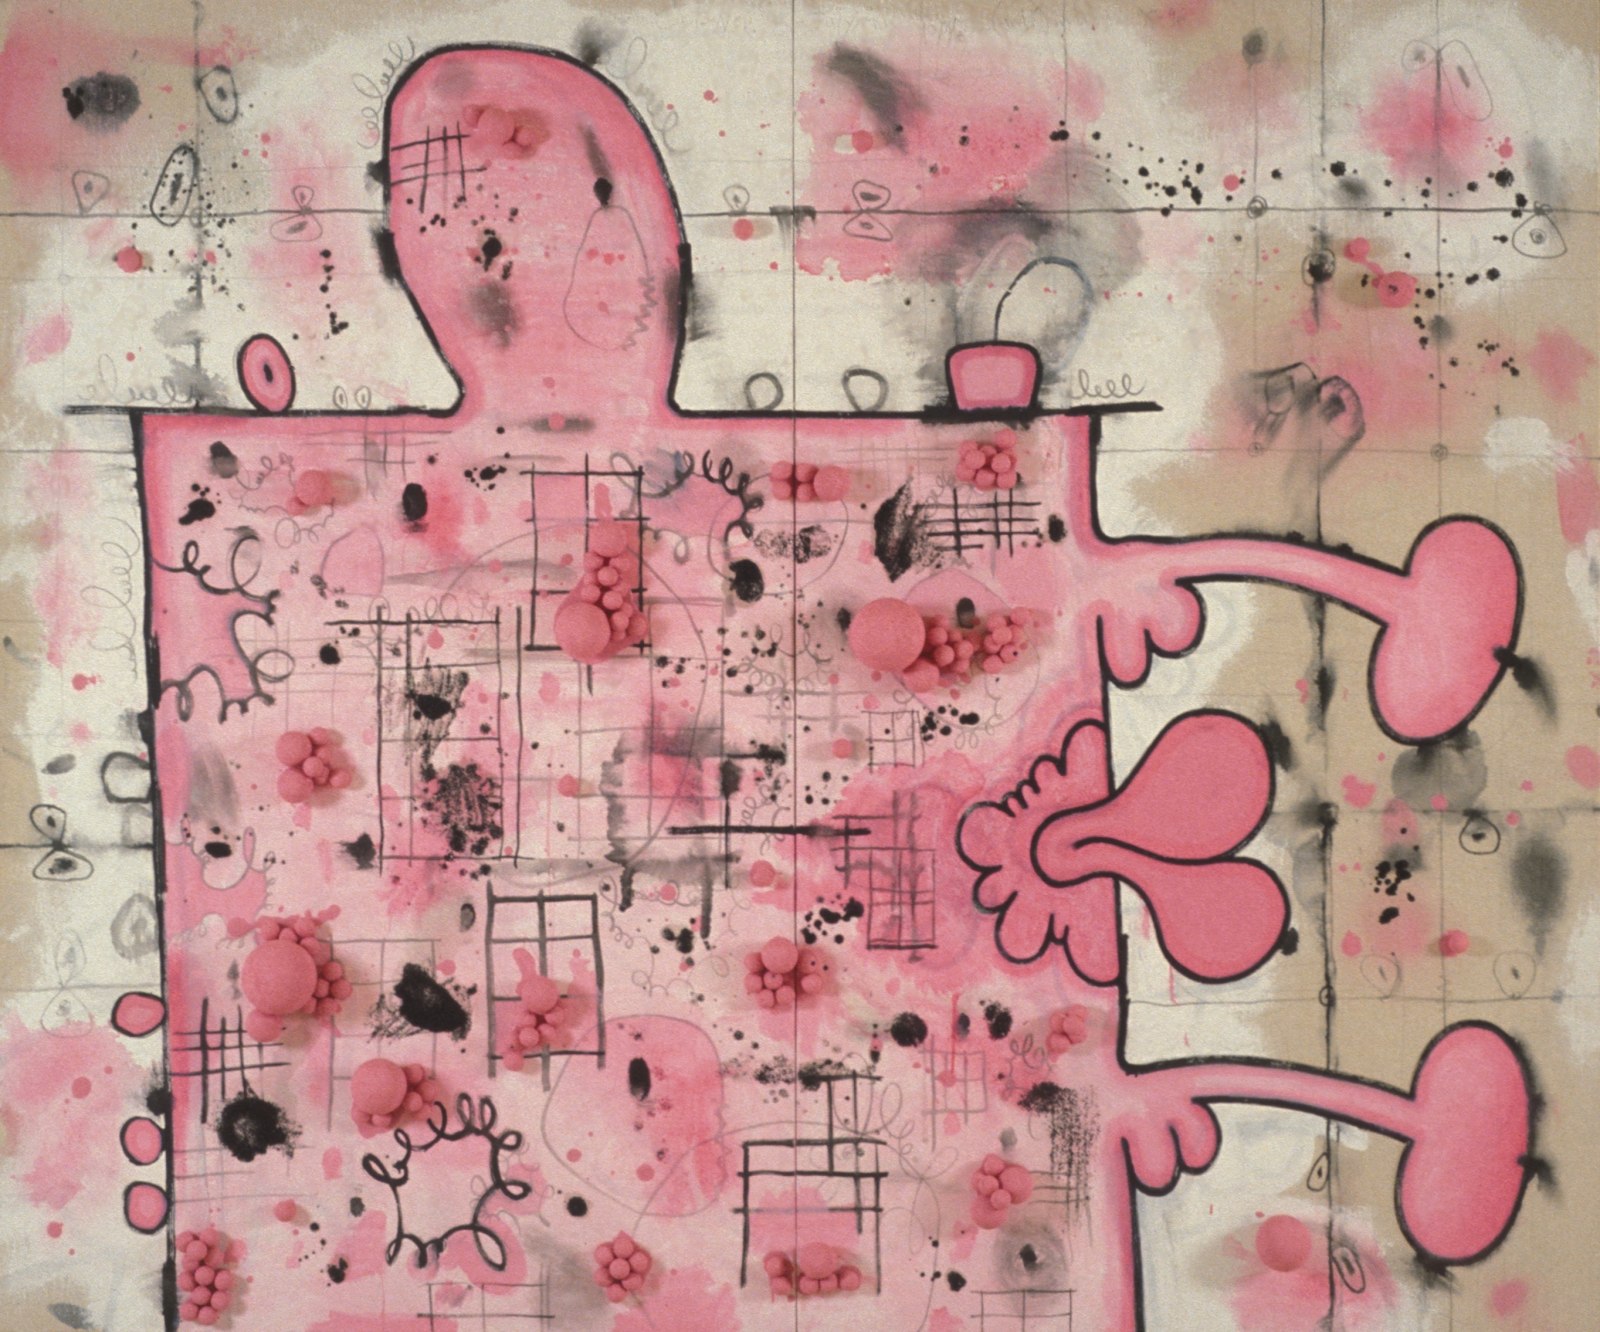 CARROLL DUNHAM, Pink Box with Two Extensions, 1995-96